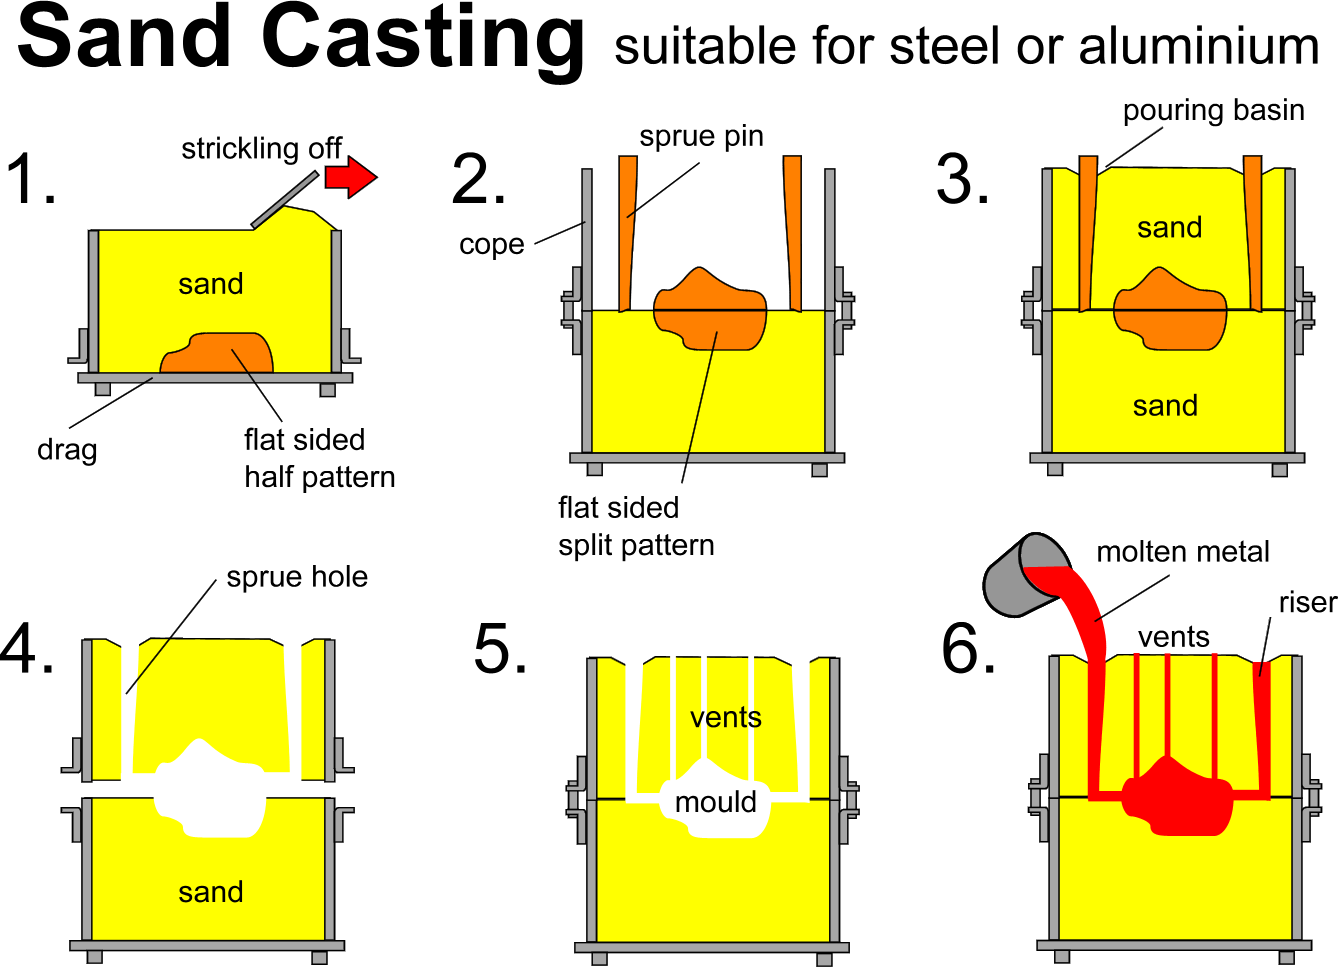 Stages in sand casting